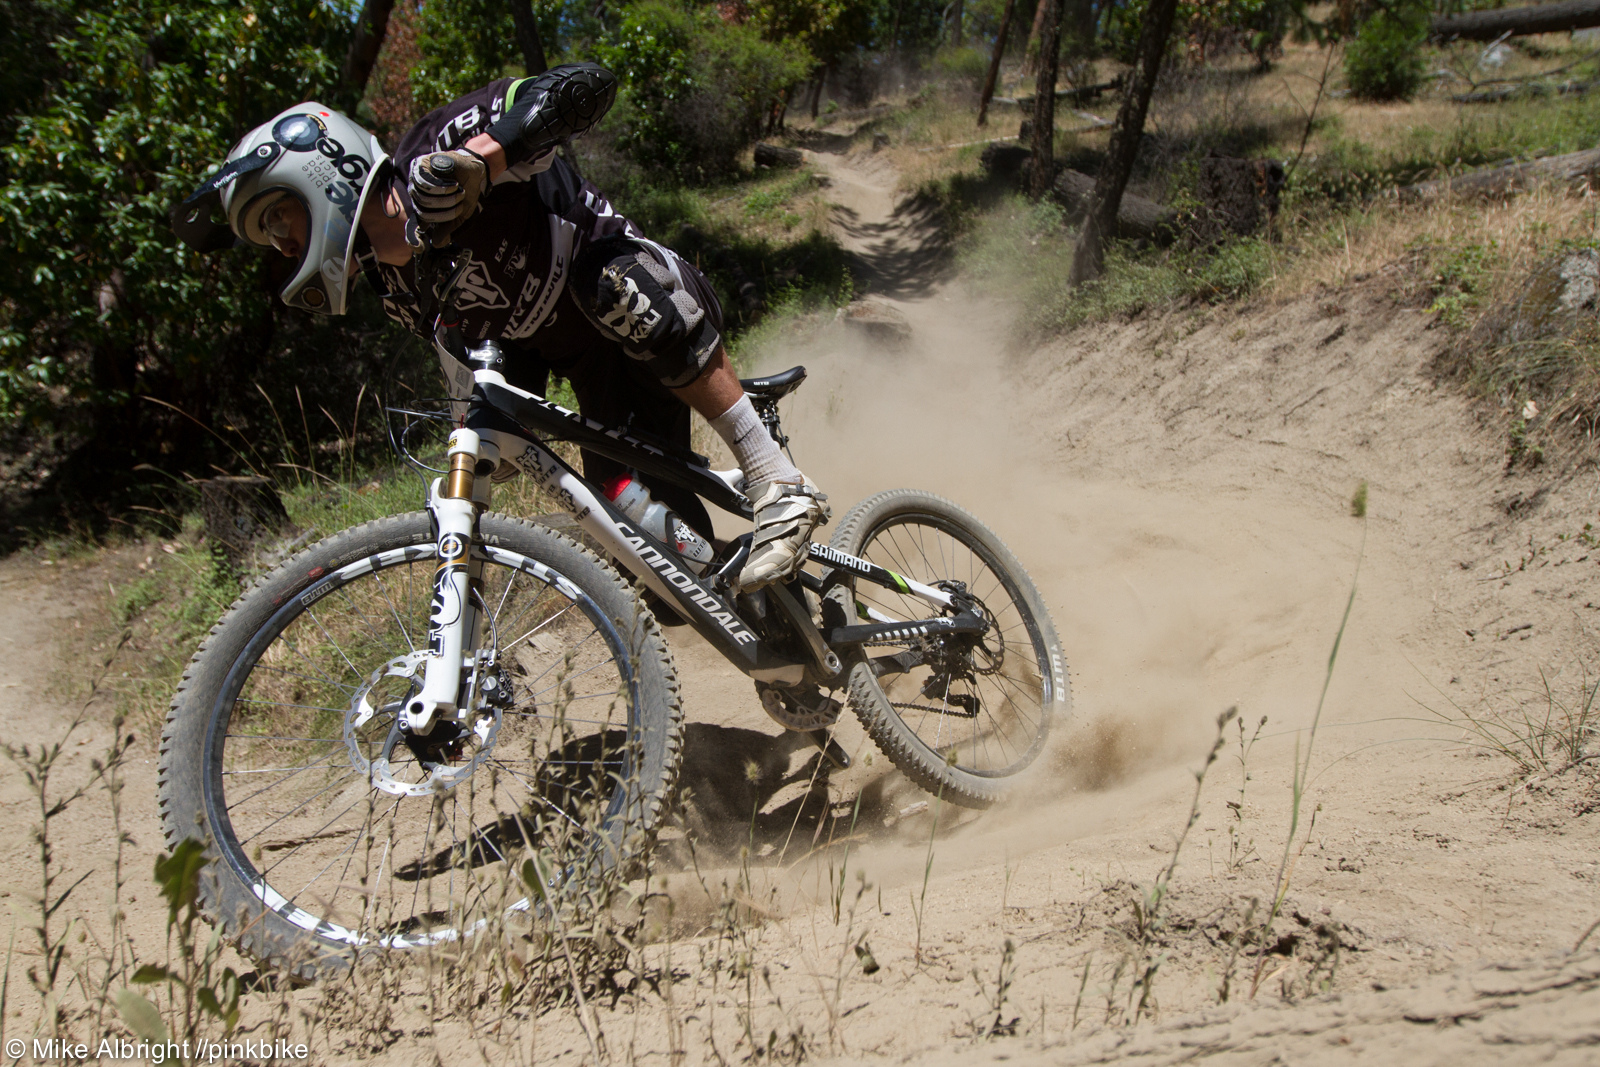 WTB's Marco Osborne gets a little loose on his way to a podium finish at the 2013 Ashland Mountain Challenge